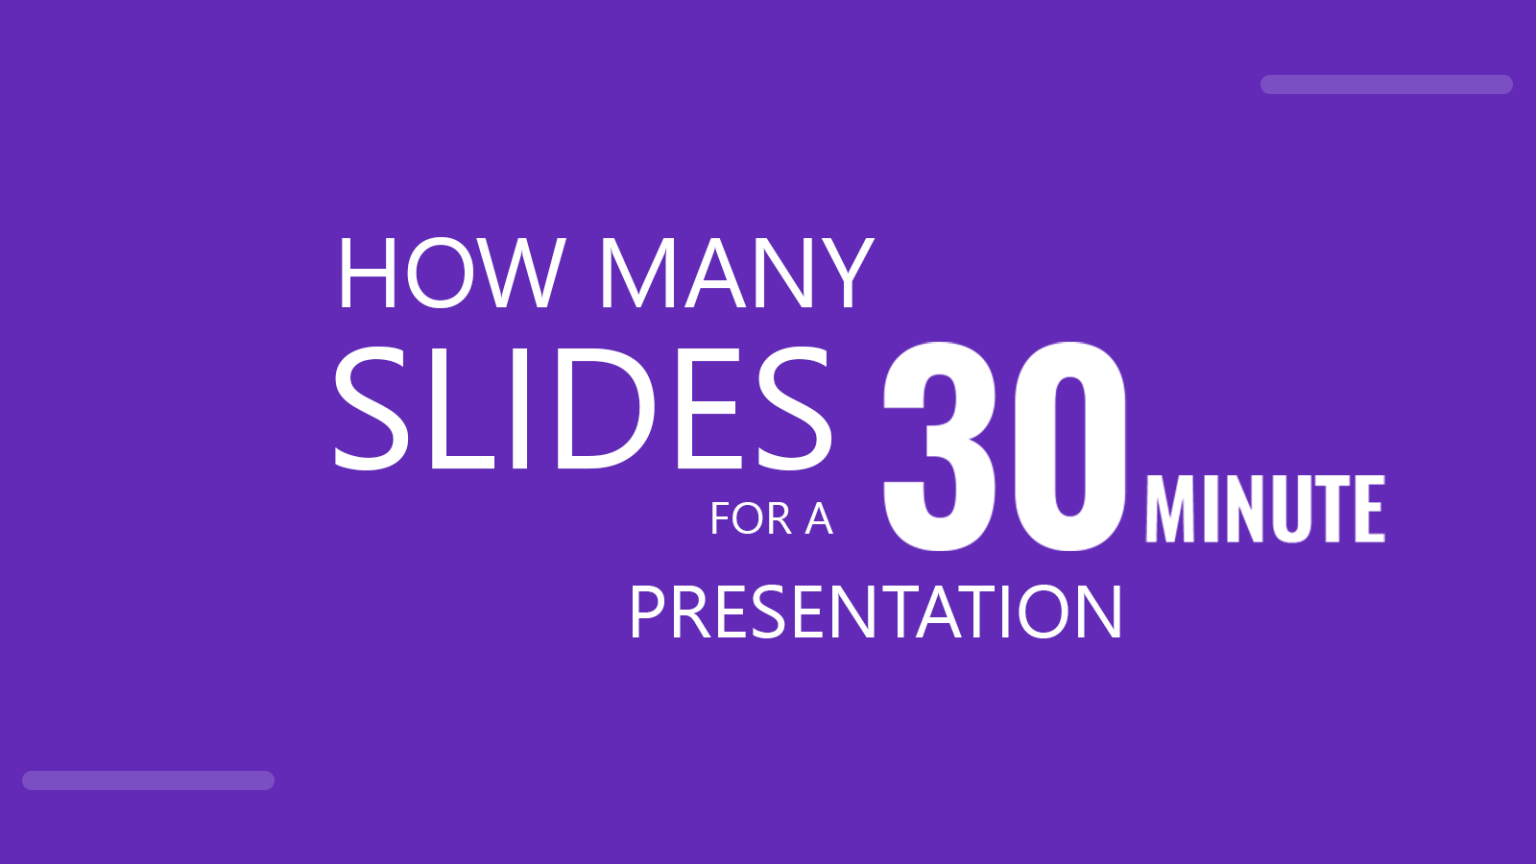 how to give a 30 minute presentation